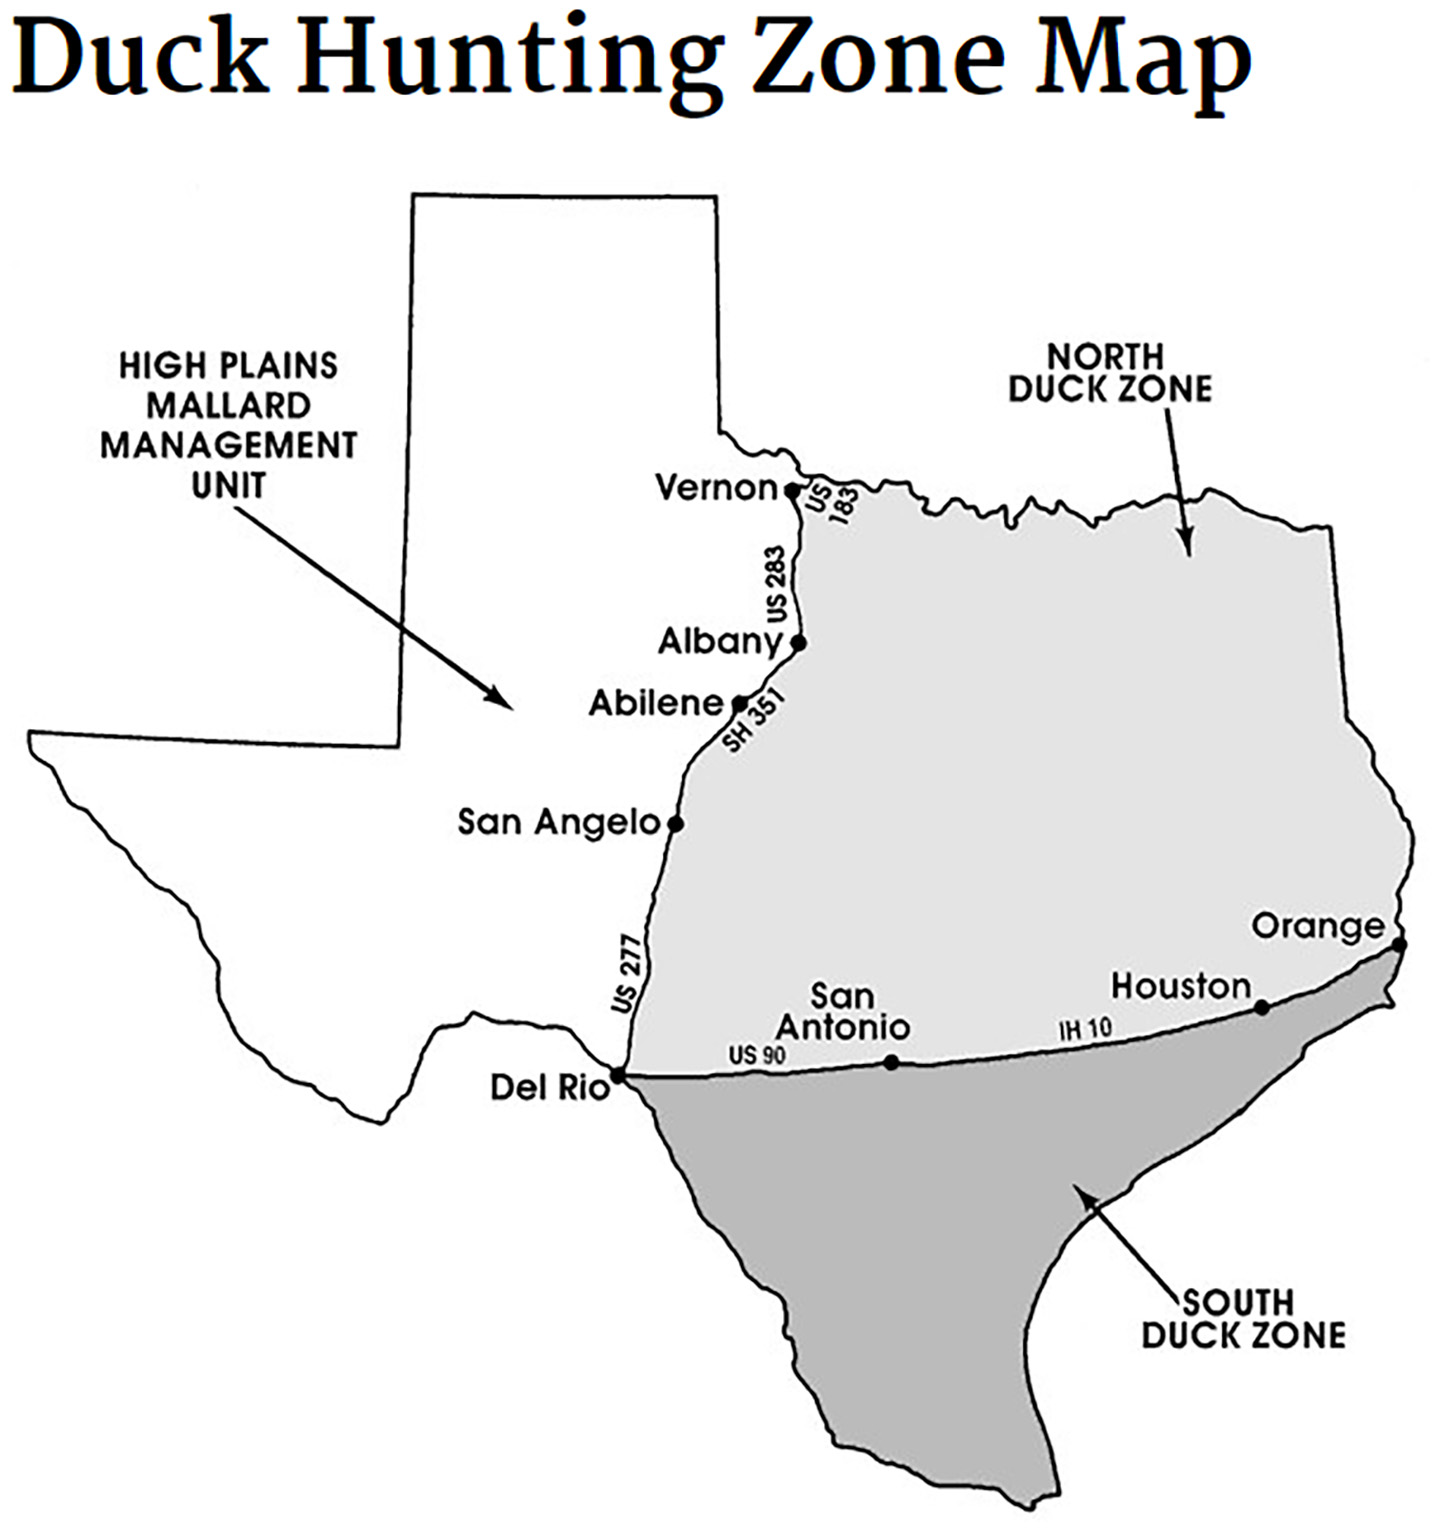 Duck hunting zone map